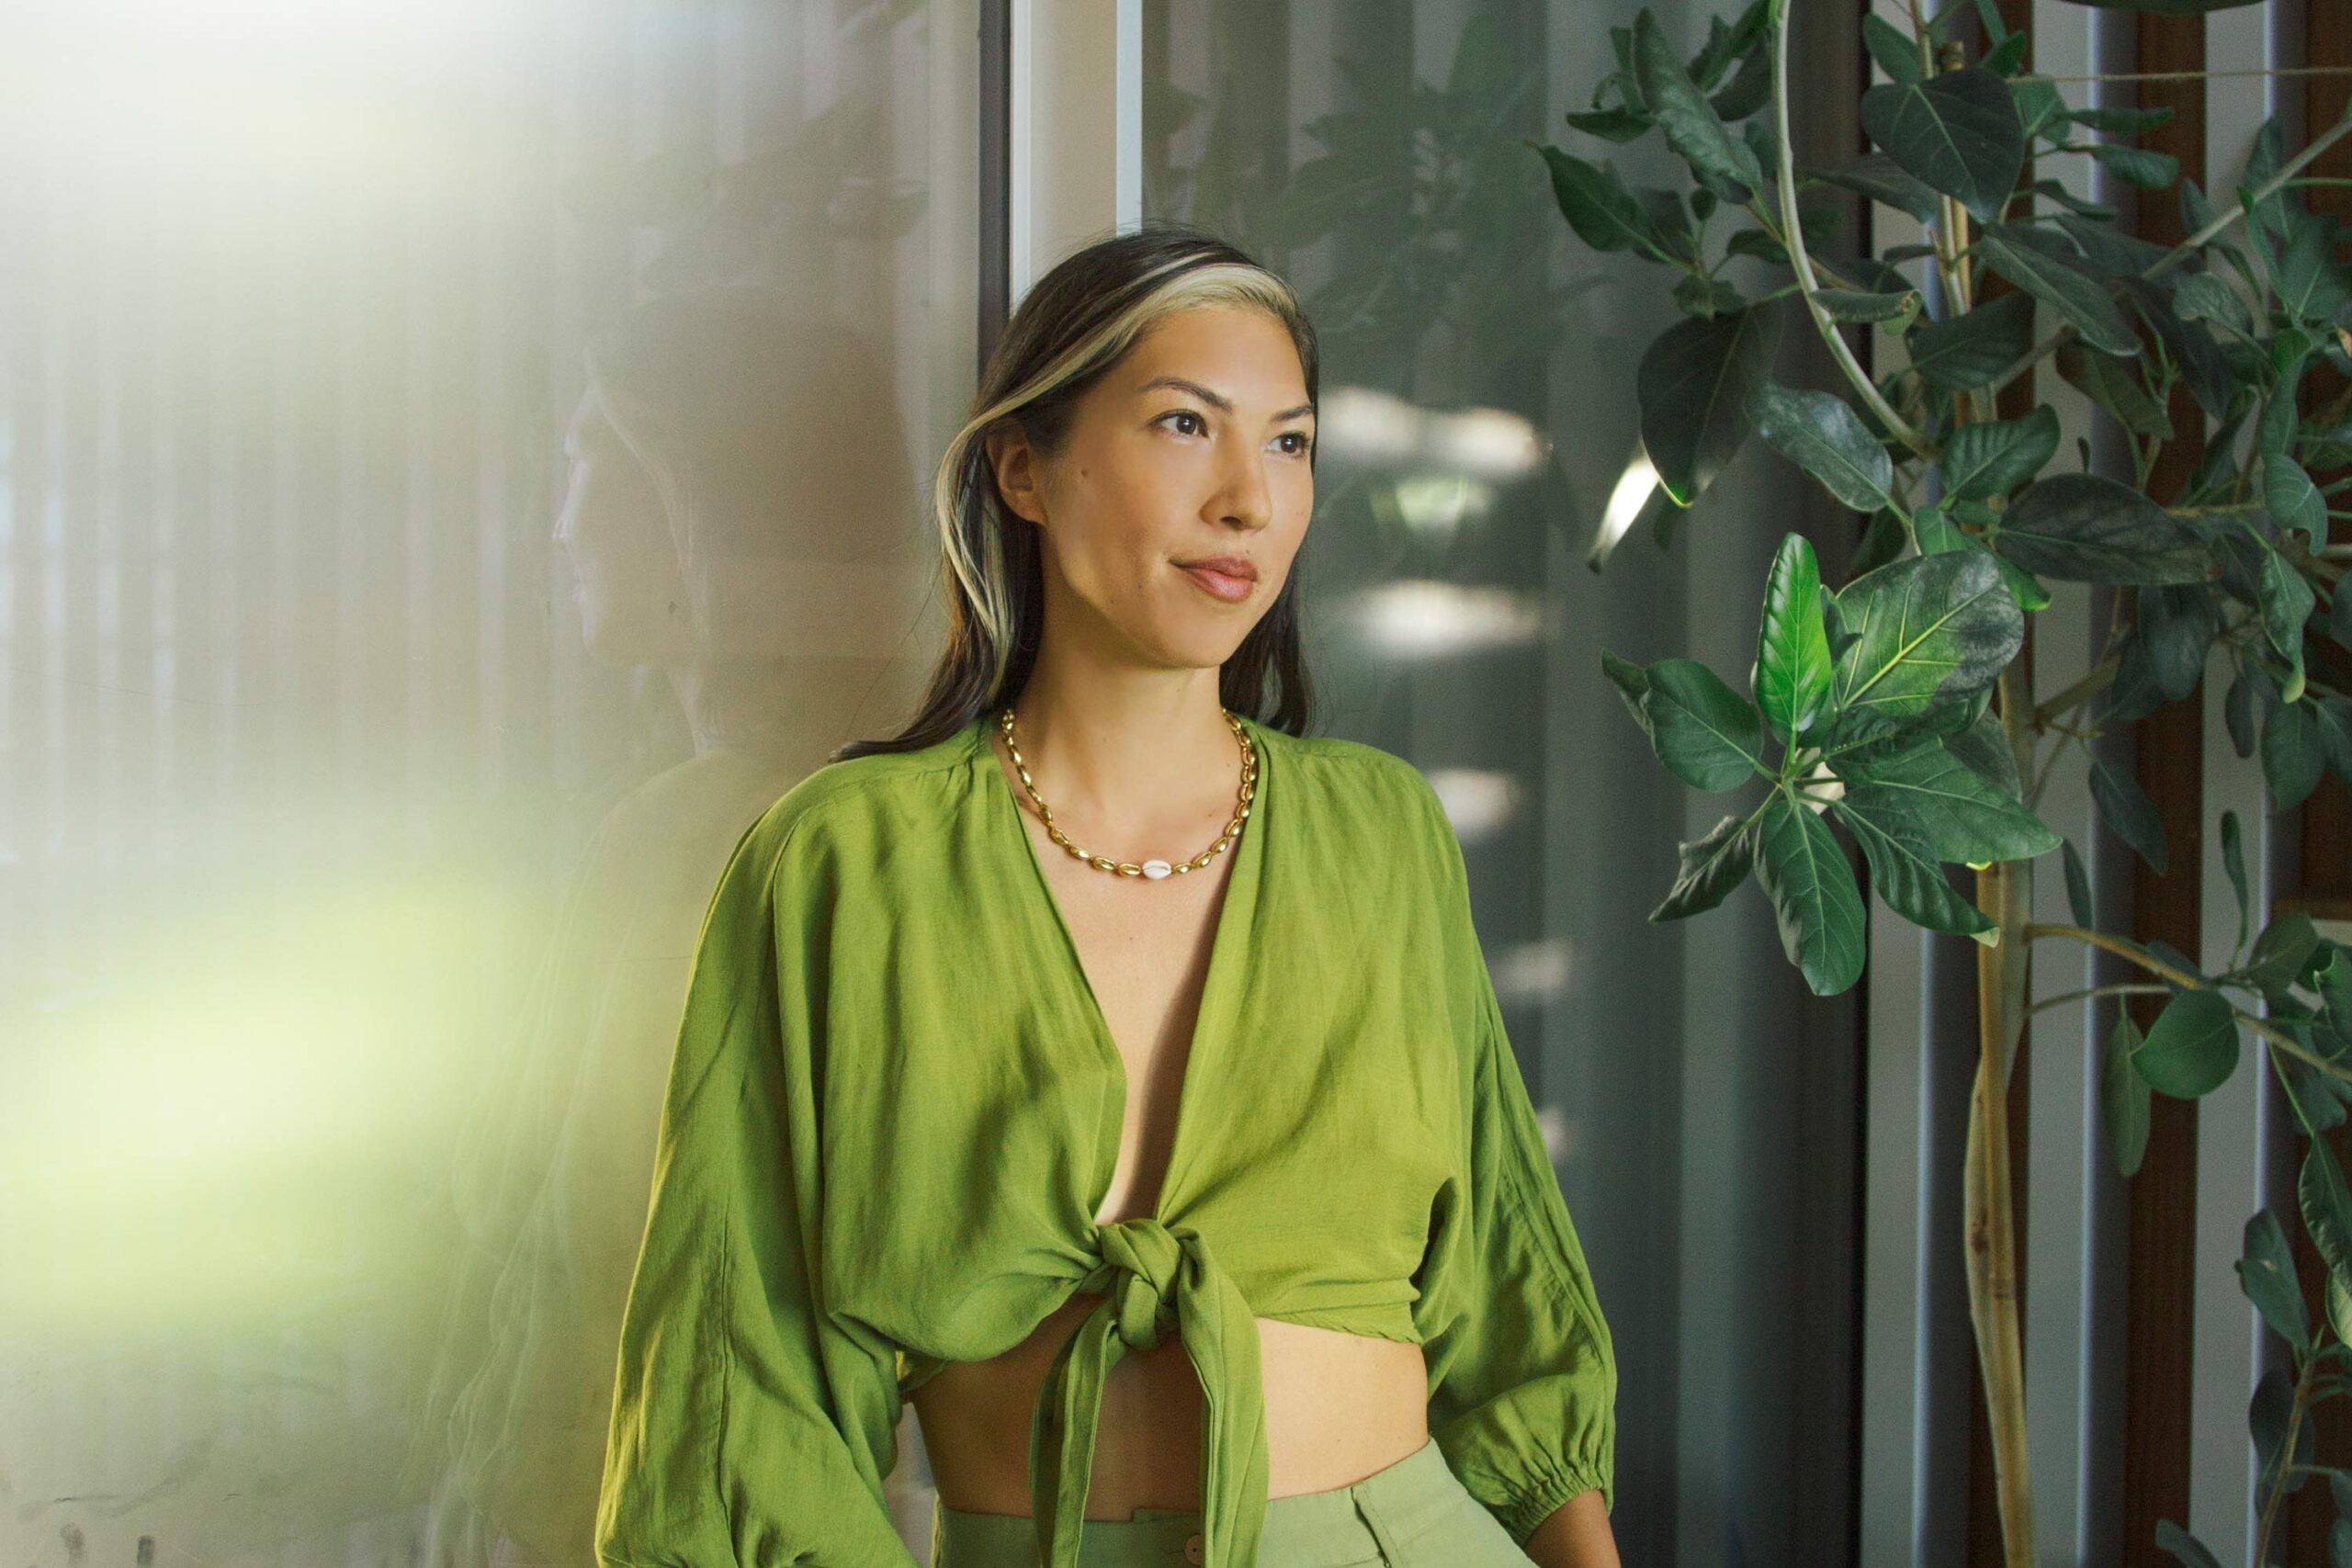 A woman wearing a green top is standing in front of a glass door and looking towards her right side.